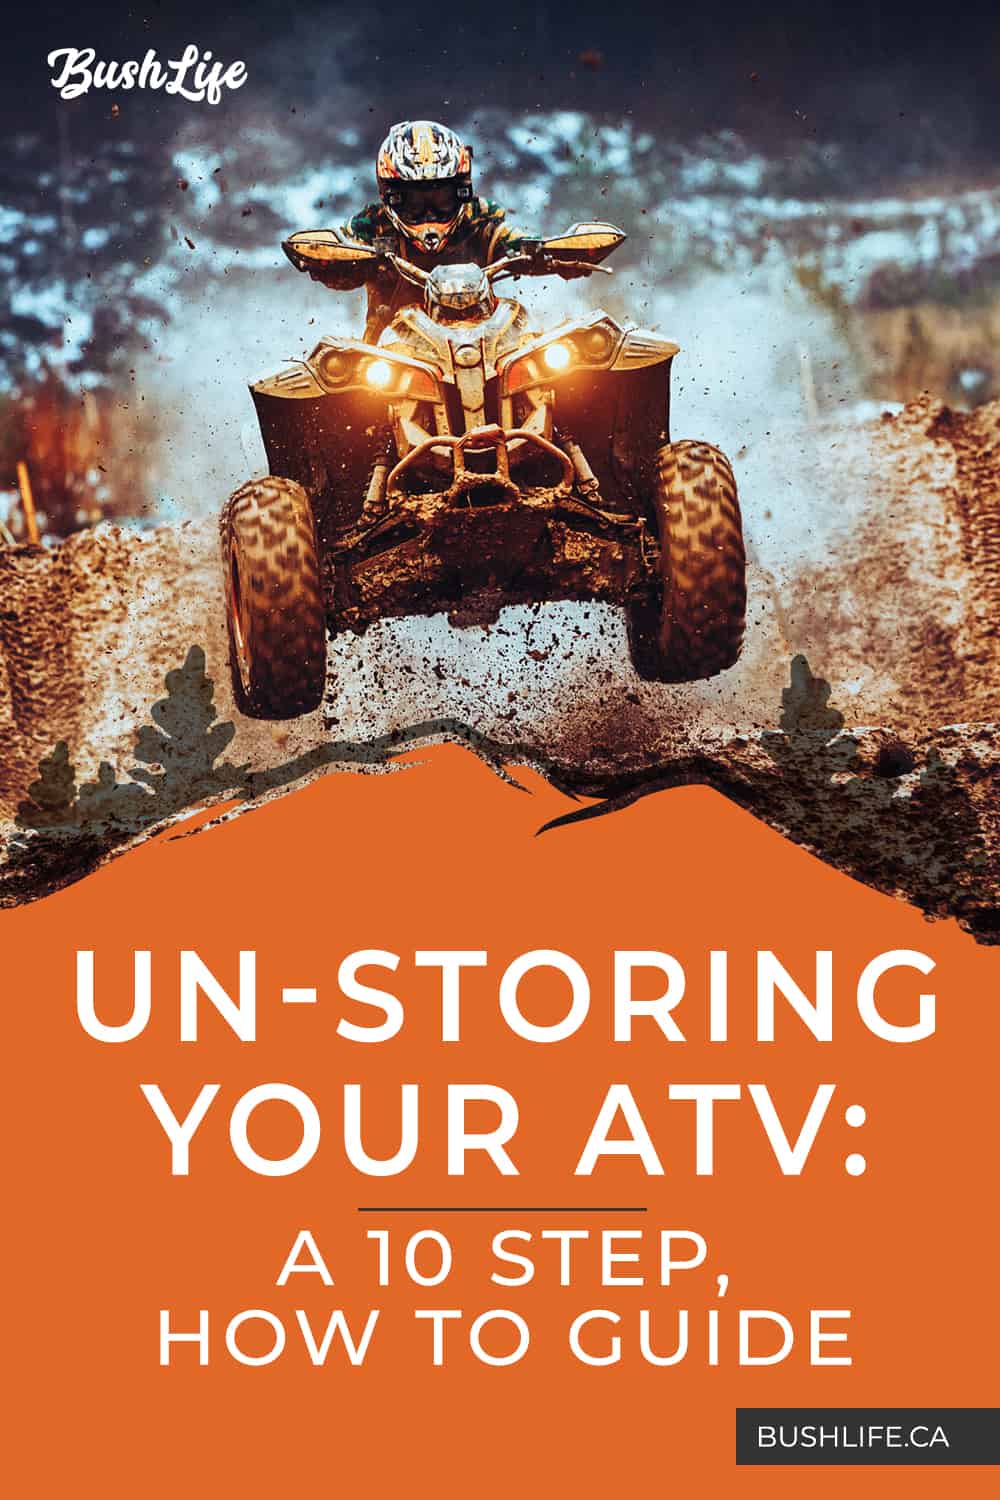 Un-Storing Your ATV: A 10 Step, How To Guide